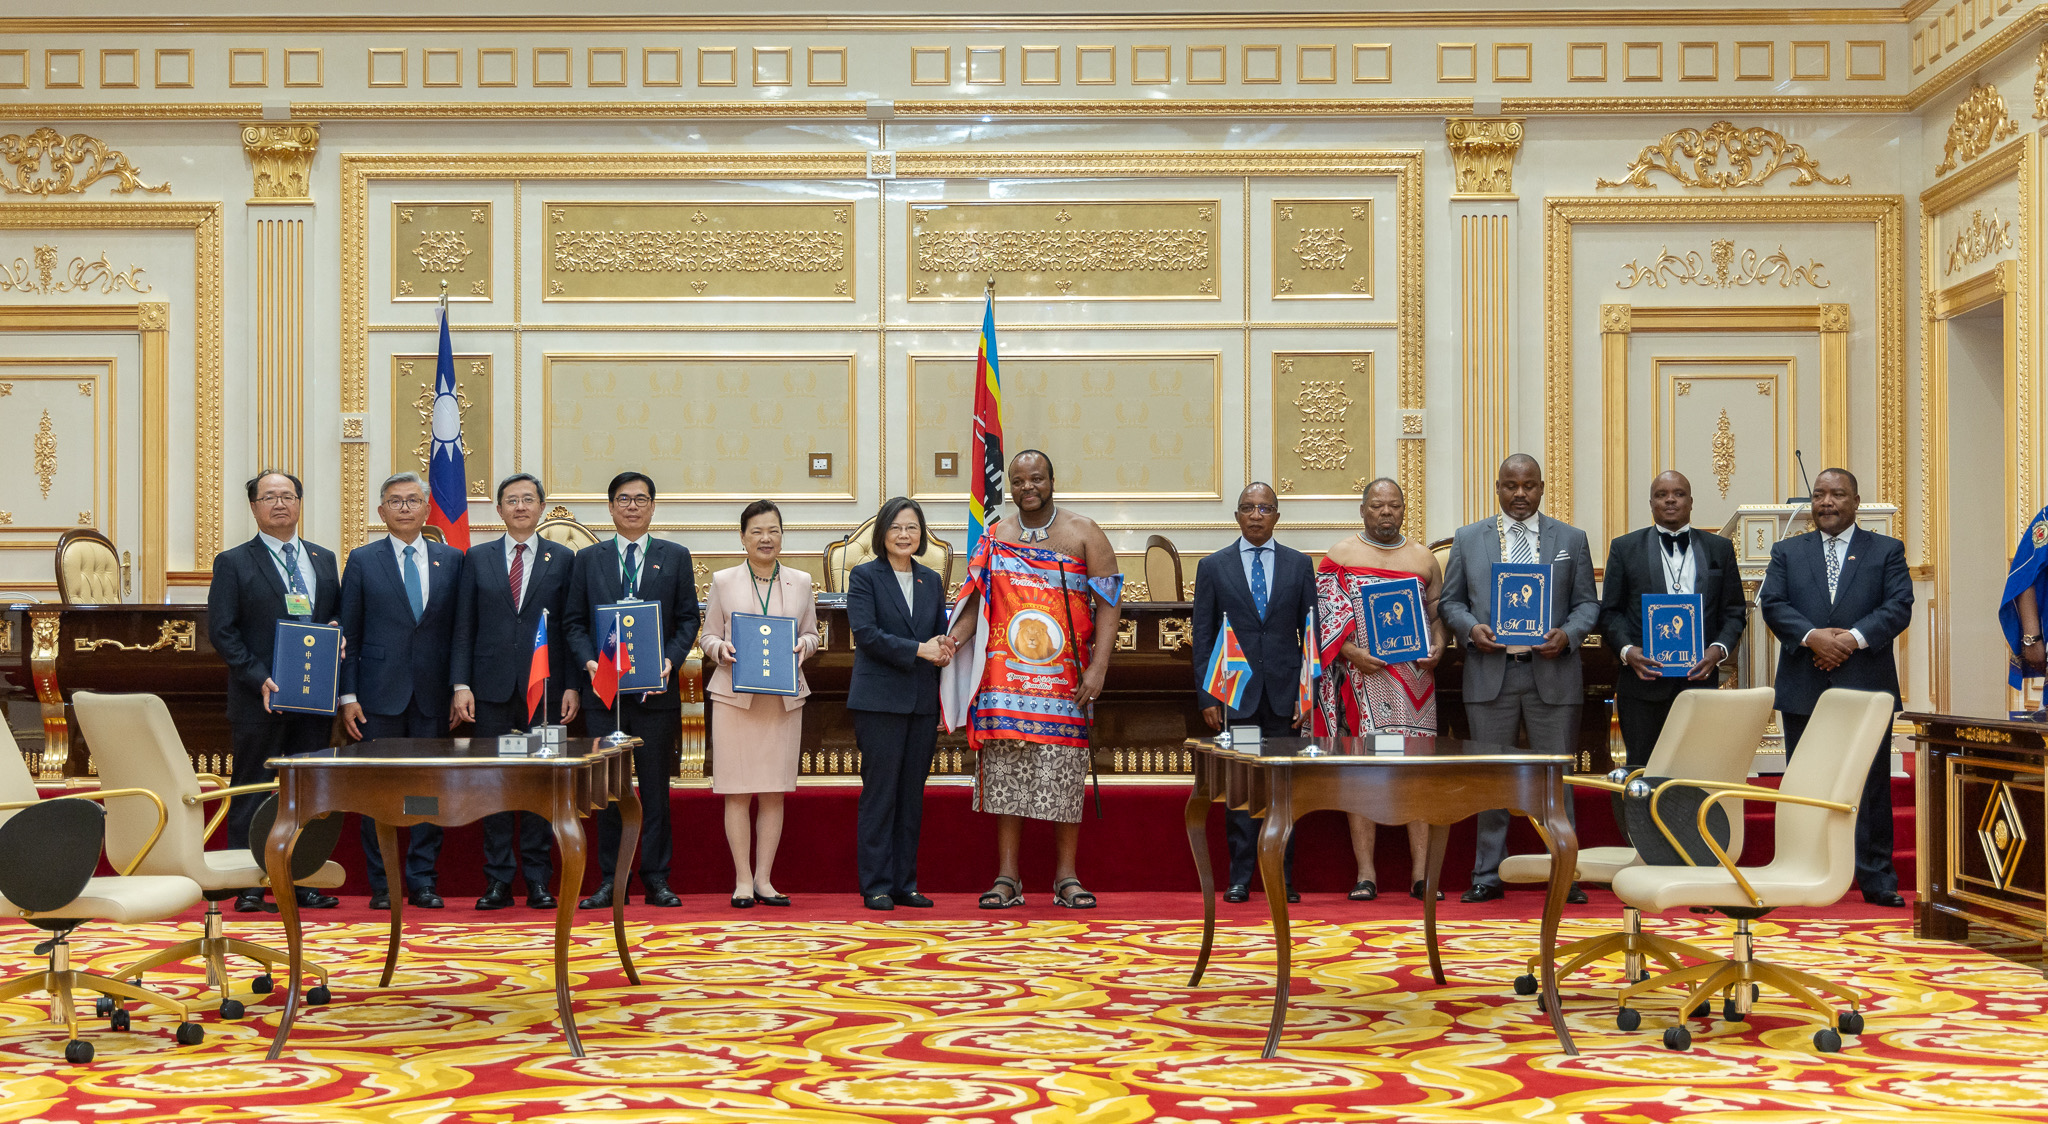 The twinning witnessed by President Tsai and King Mswati III